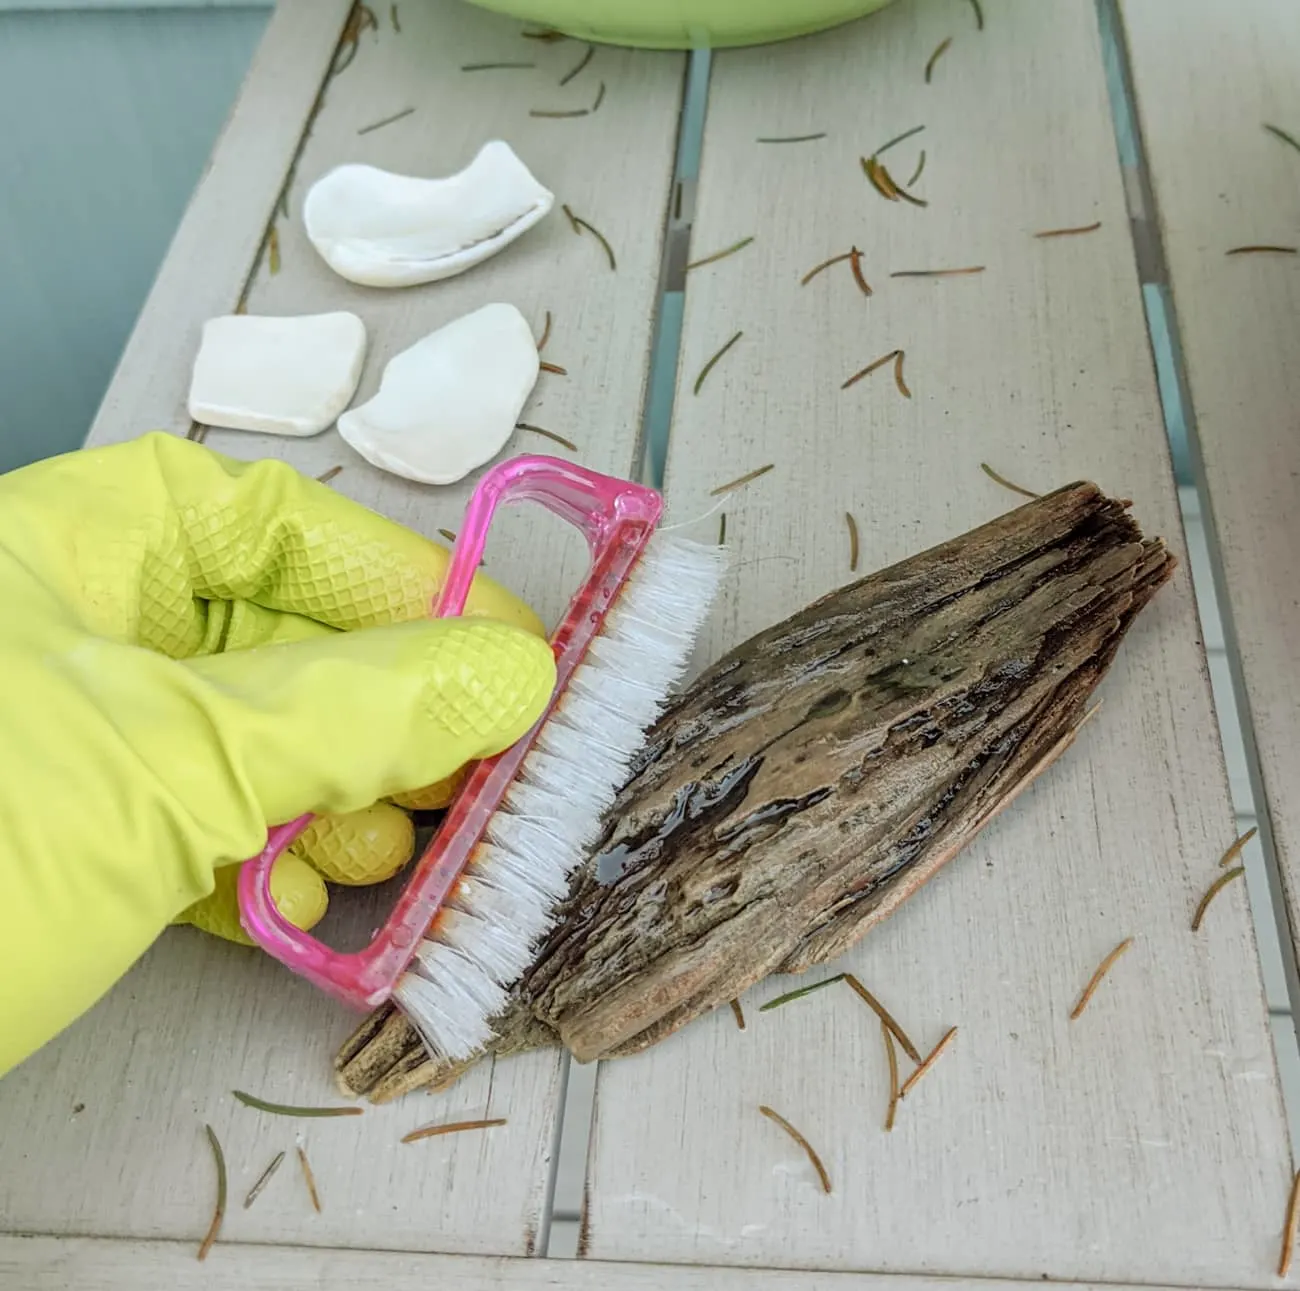 Scrubbing can remove debris that is embedded in the wood